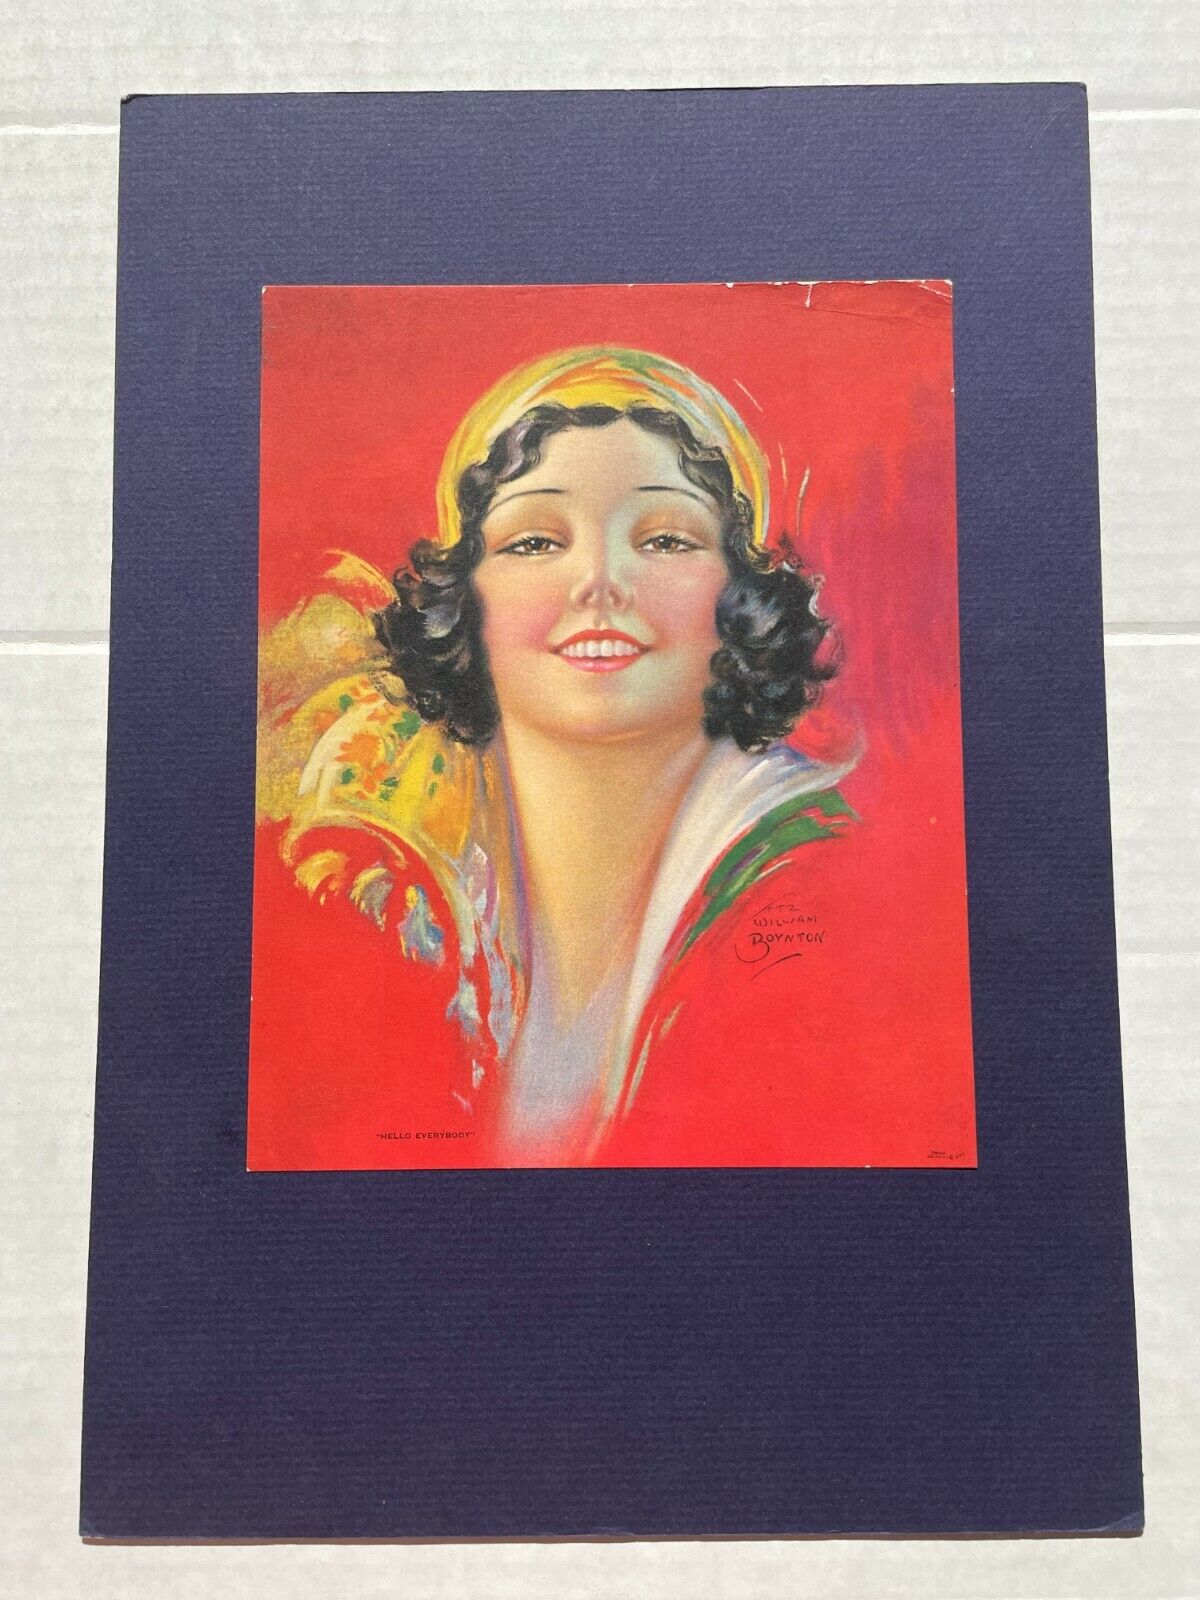 1940-50's Original Pinup Girl Picture Hello Everybody by William Boynton